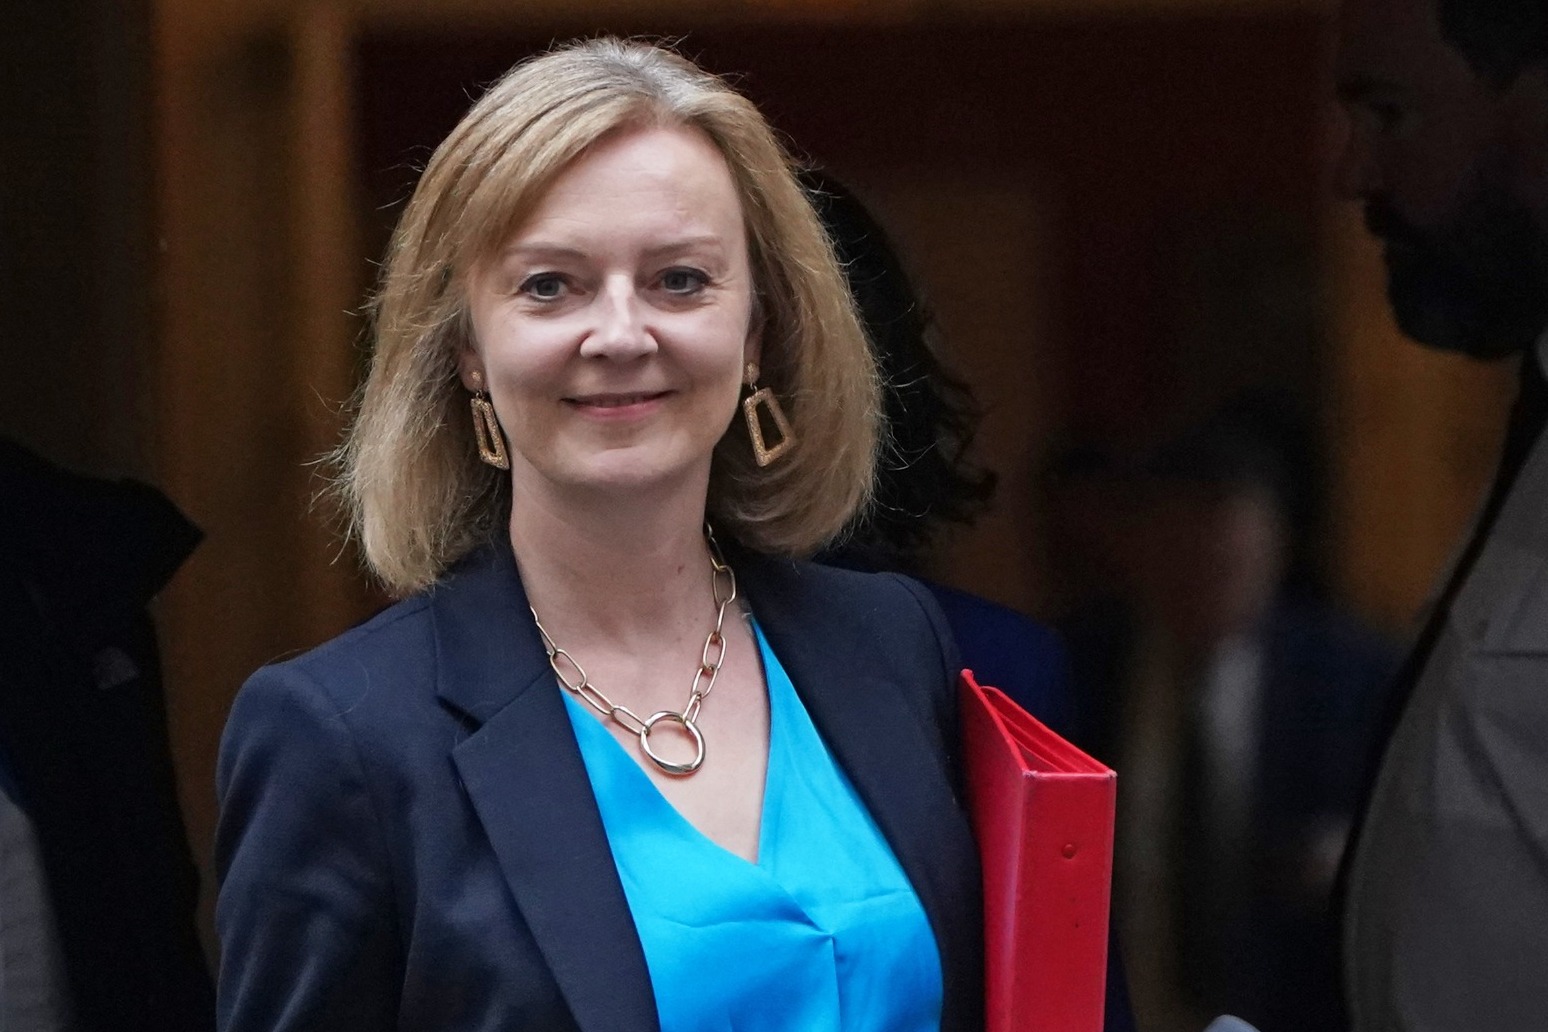 Ukraine invasion would mean ‘severe consequences’ for Russia, warns Liz Truss 